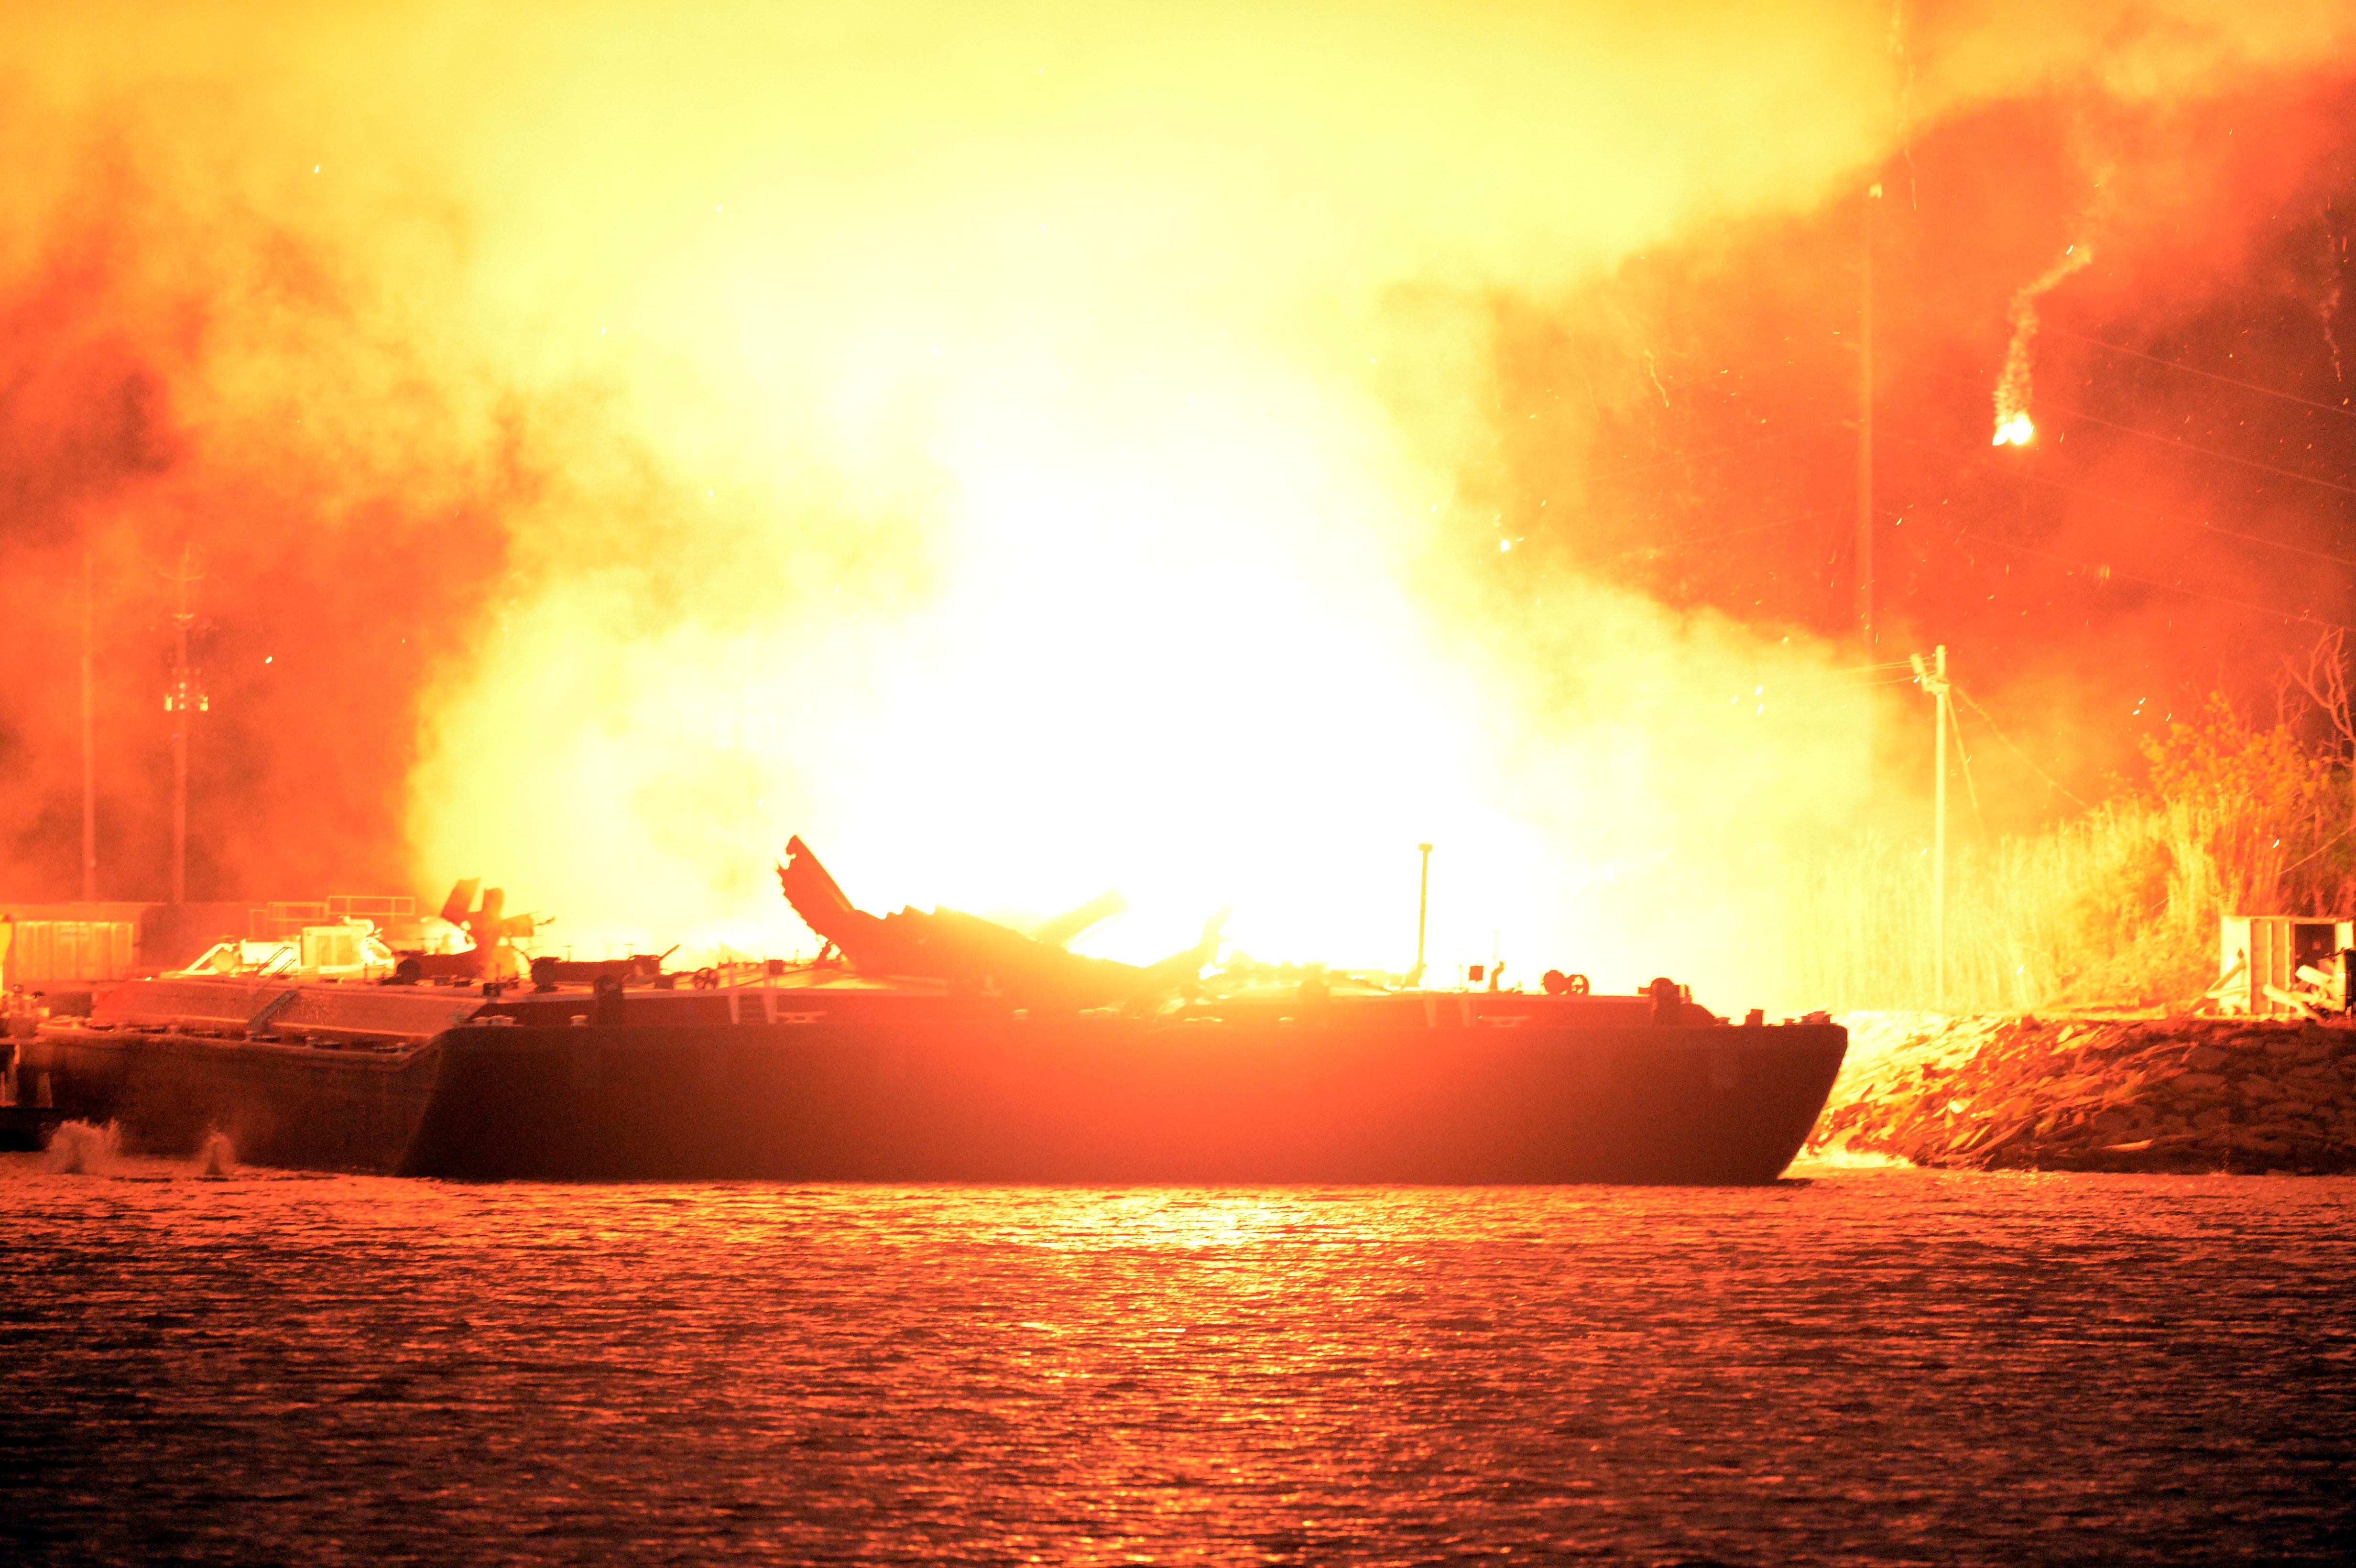 Fuel barges explode, causing large fire in Ala.